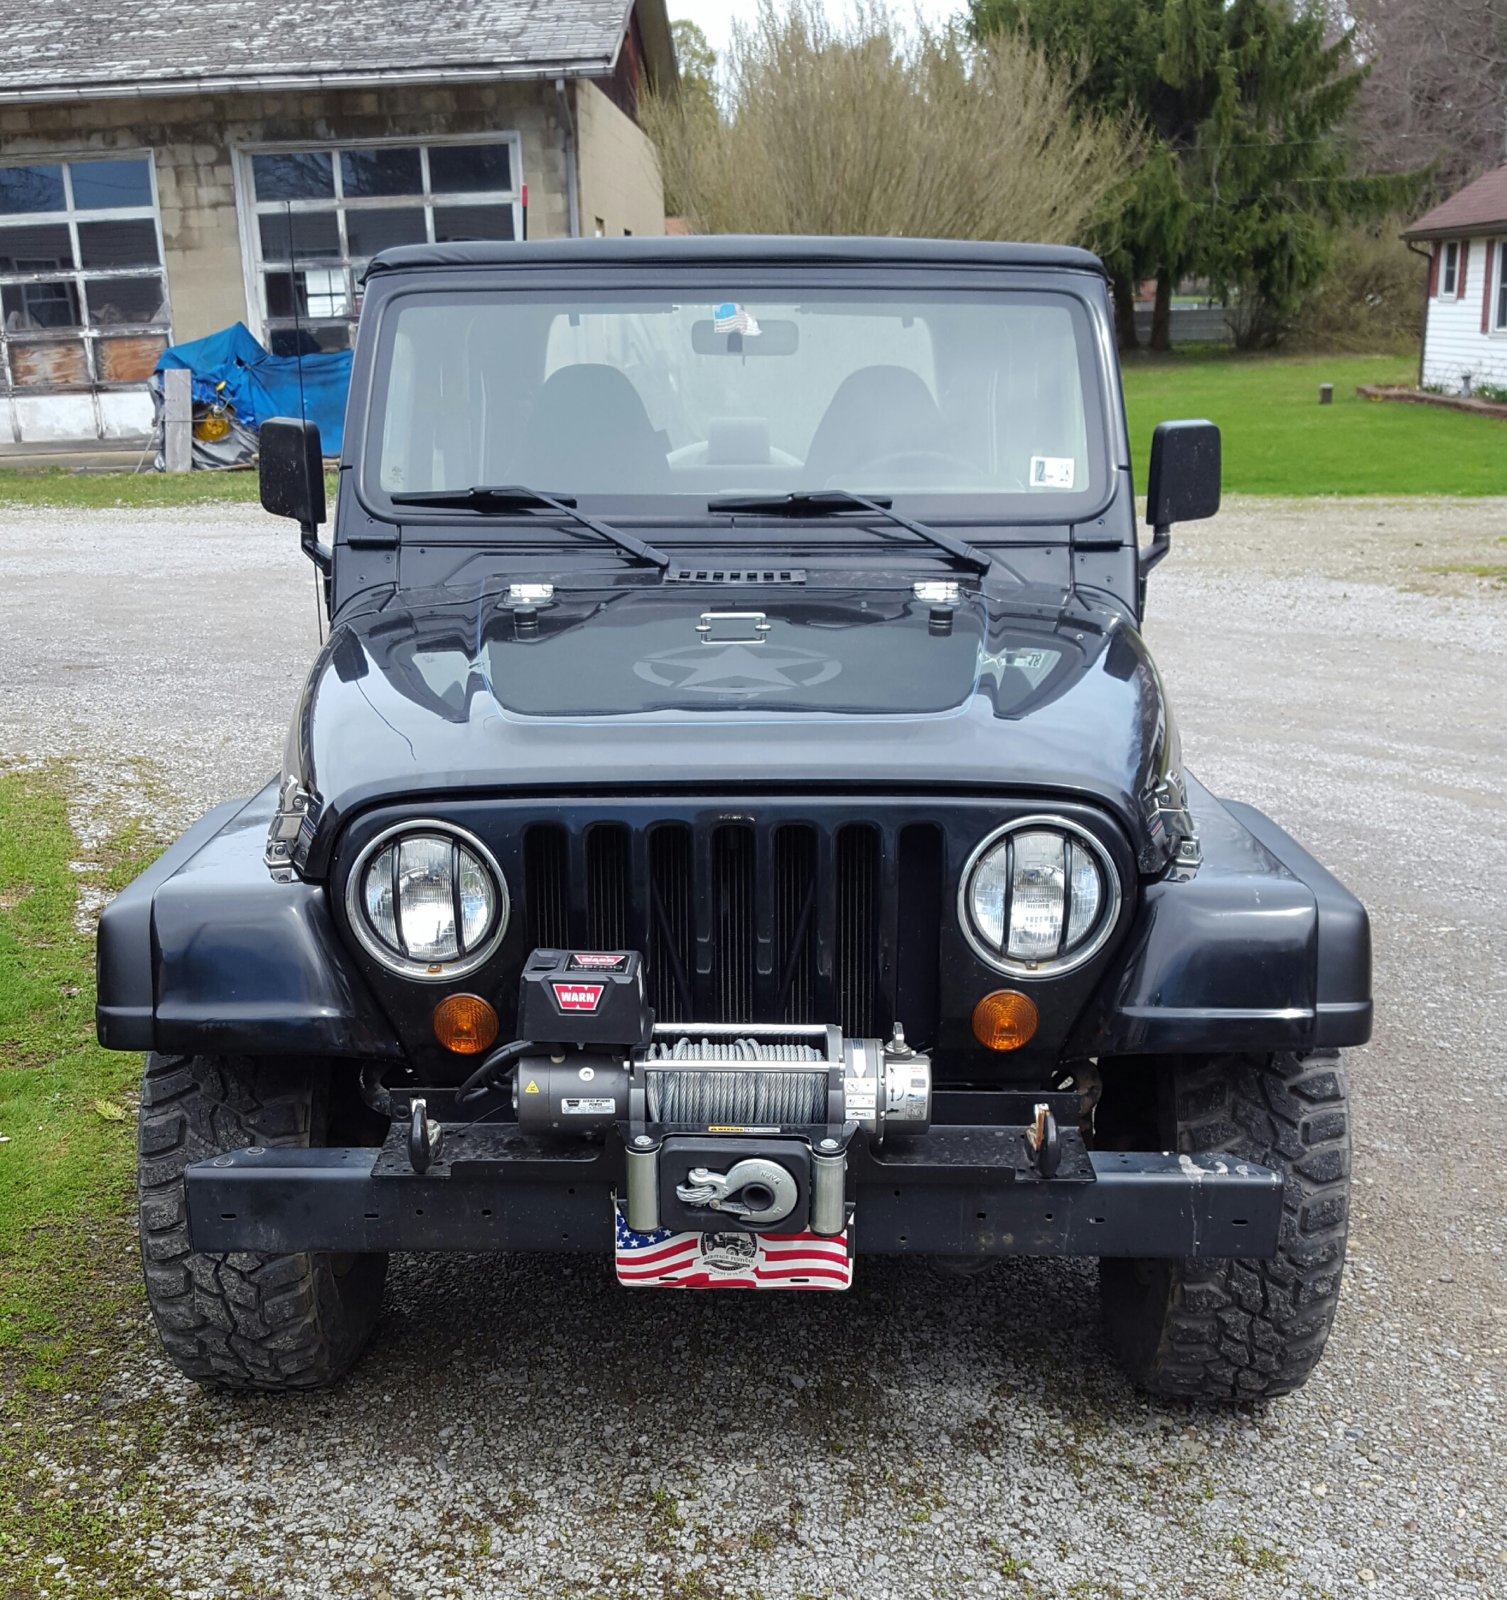 Turn signals in front grill, tube fenders | Jeep Wrangler TJ Forum